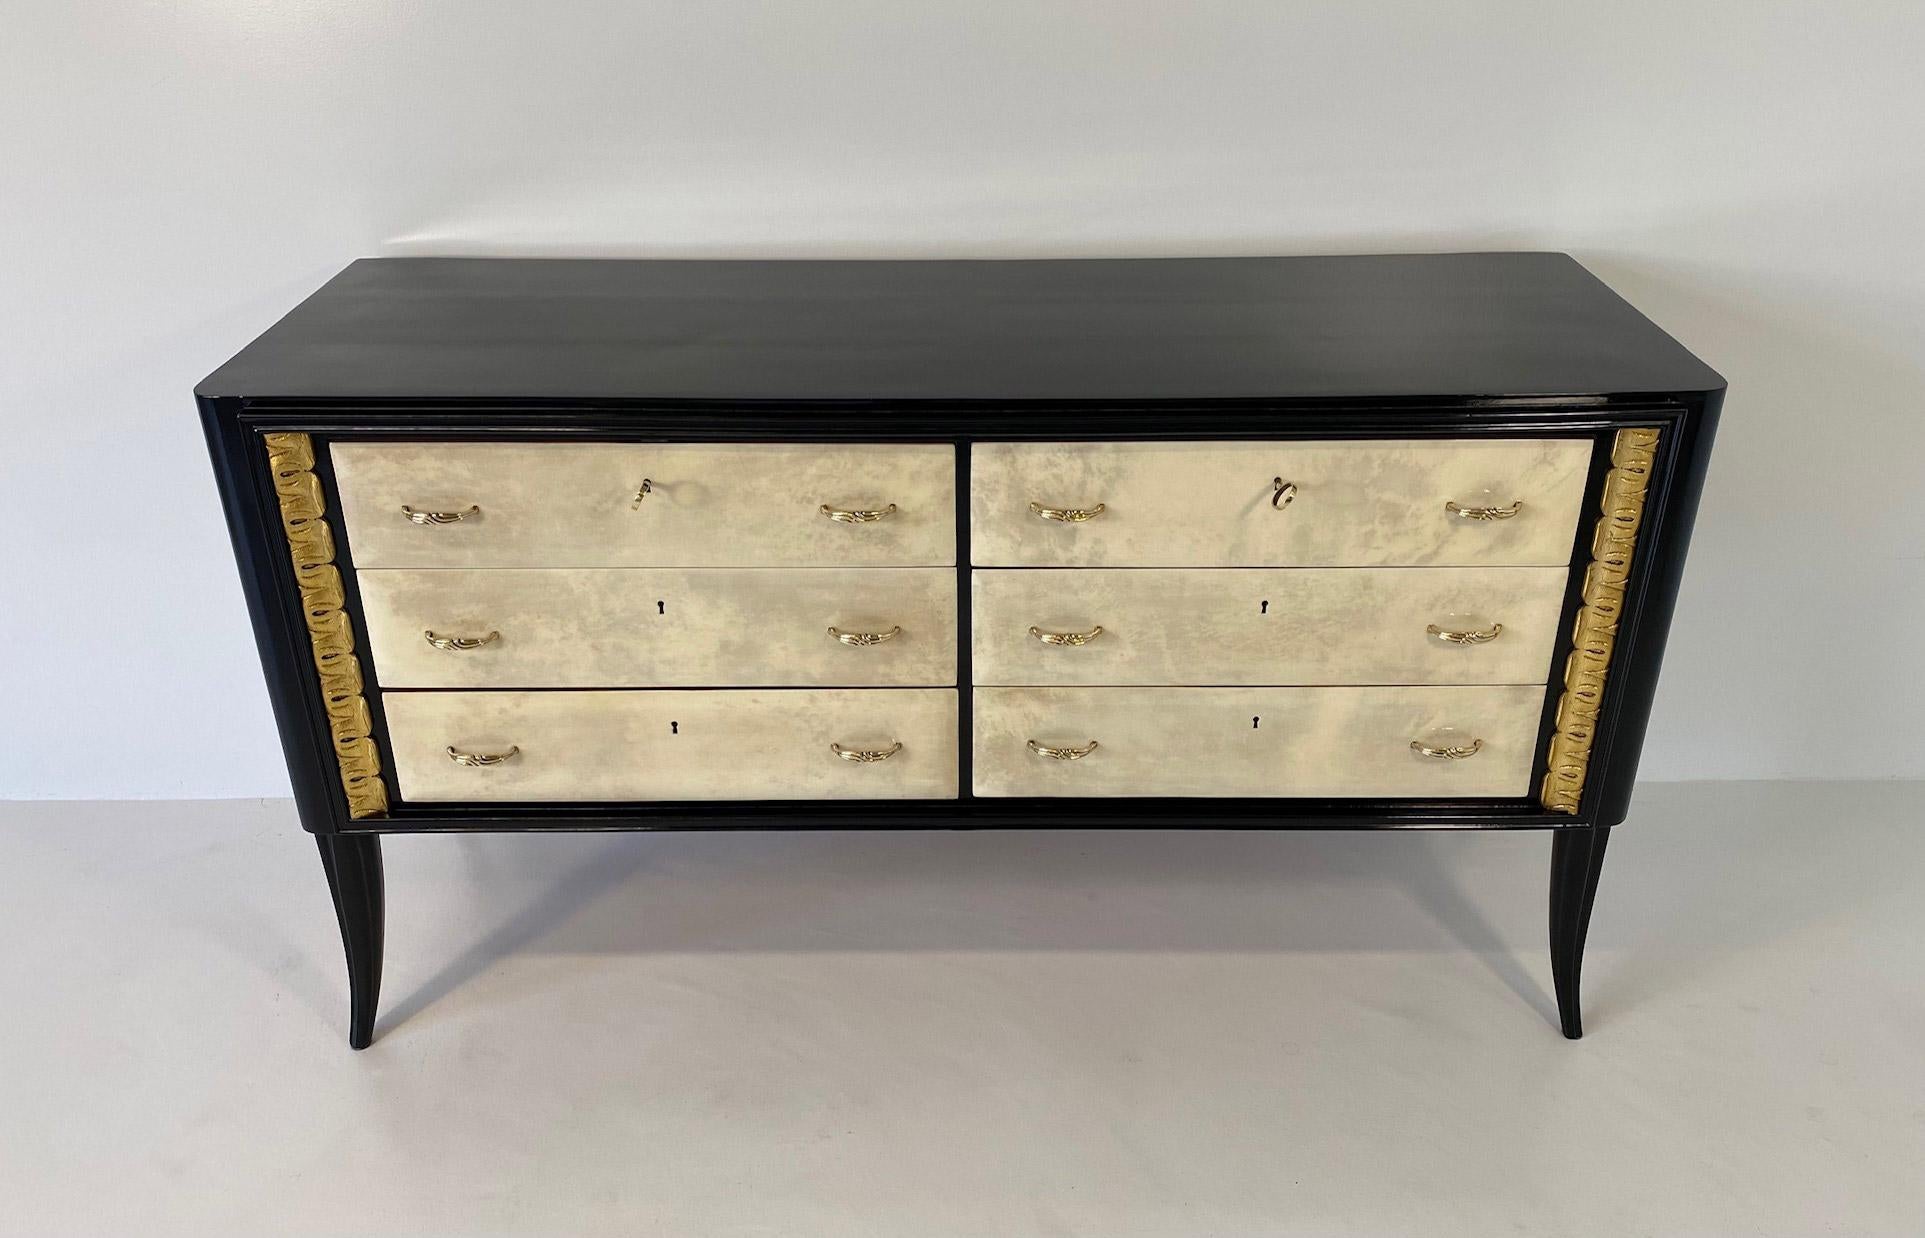 This Art Deco dresser was produced in Italy in the 1940s.

This dresser features six parchment drawers with a black lacquered structure and two gold leaf decorations. 

The handless are in brass.

